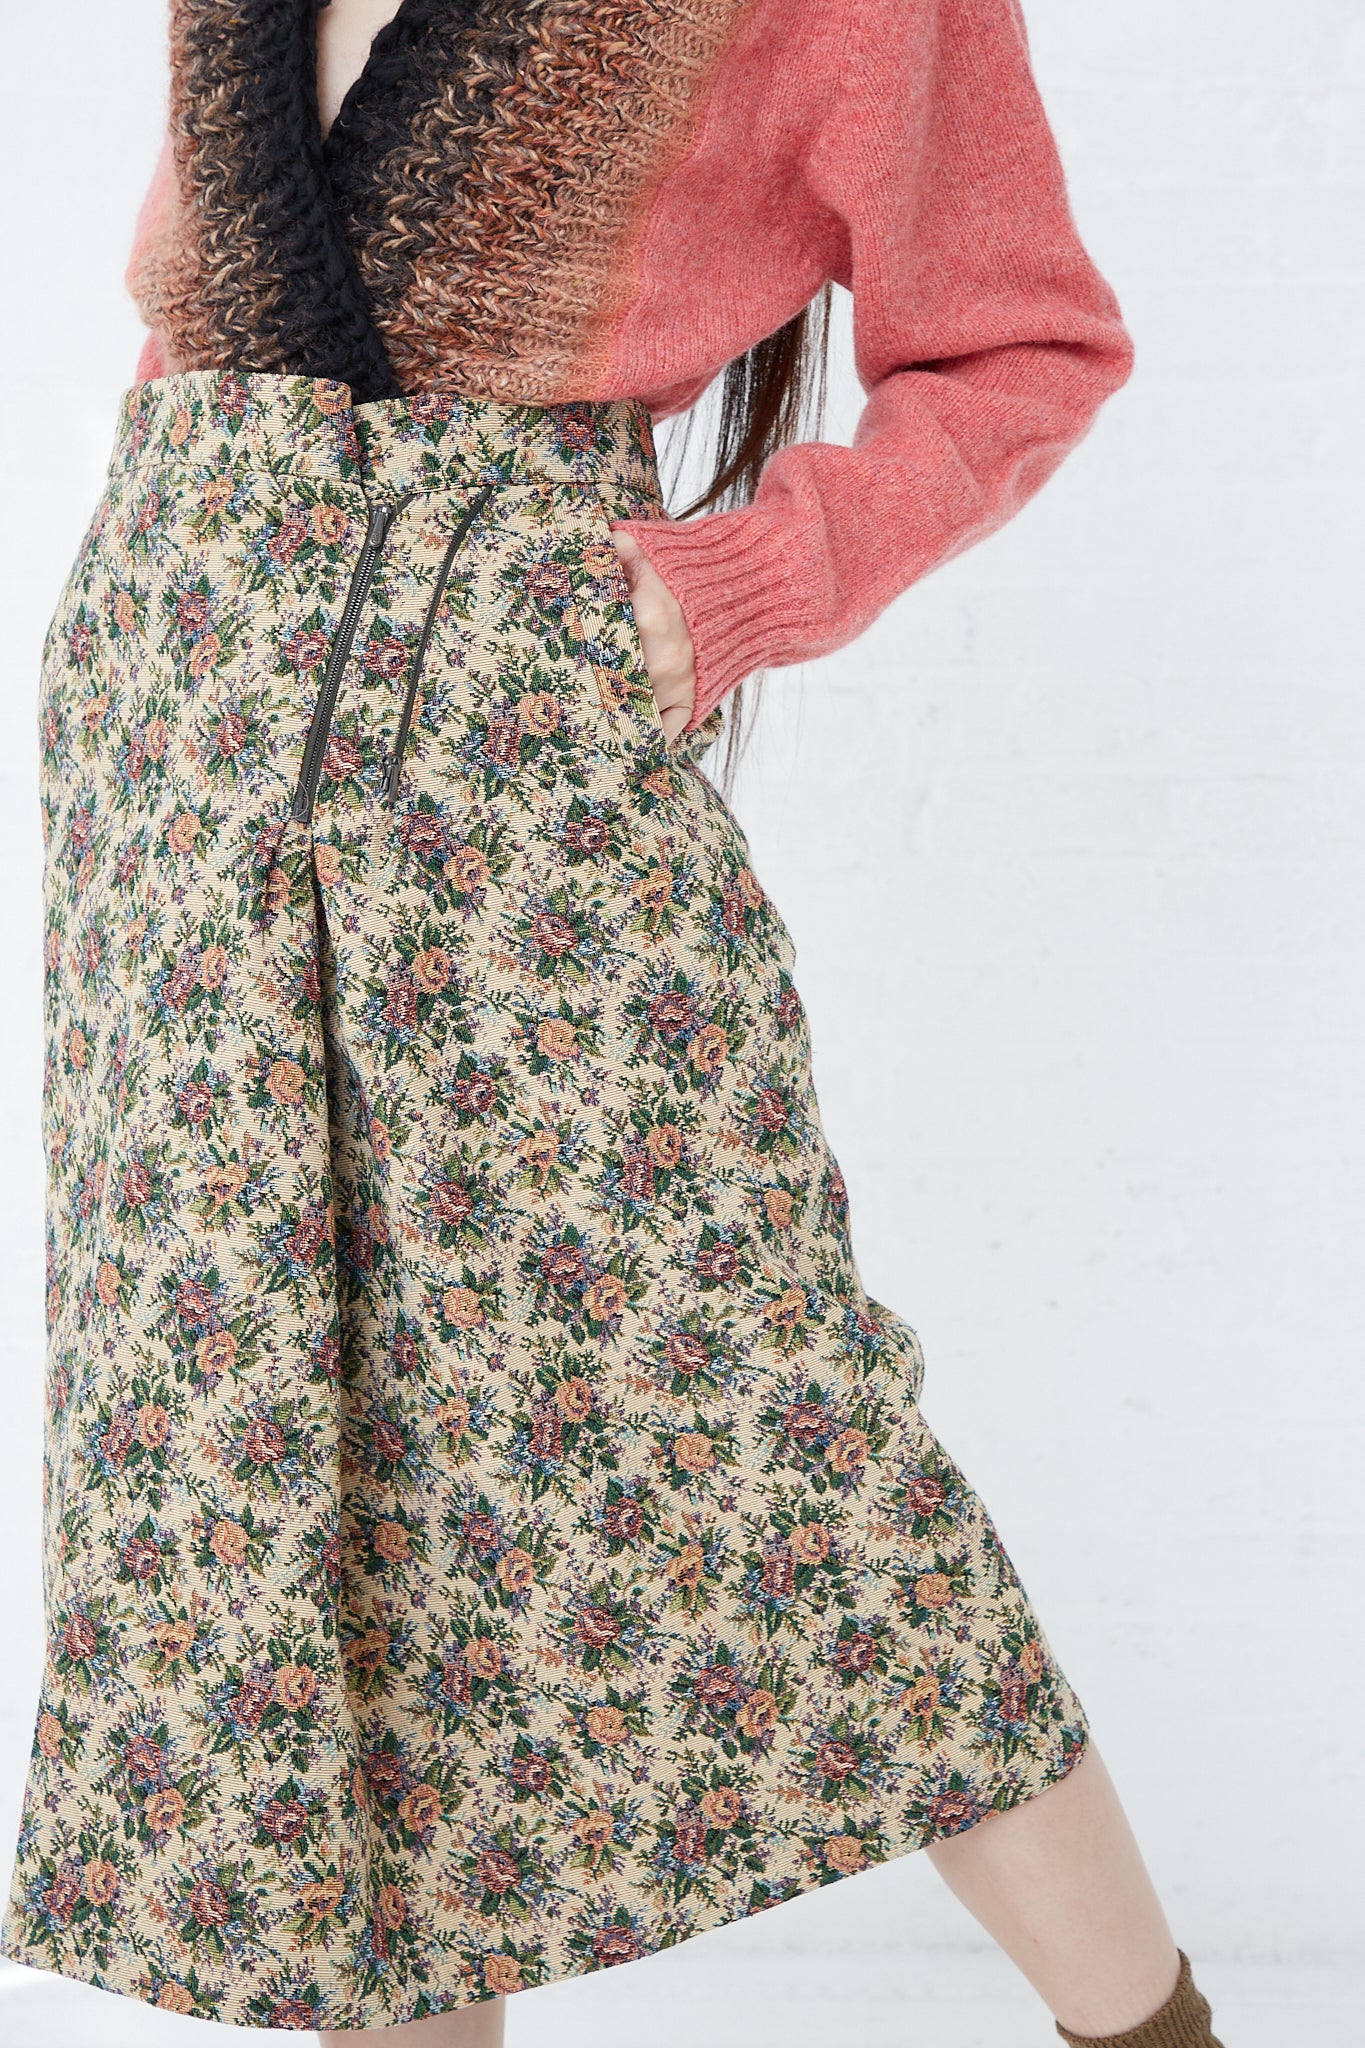 A woman in a Bless SMLXL Skirt No. 75 in Flower.